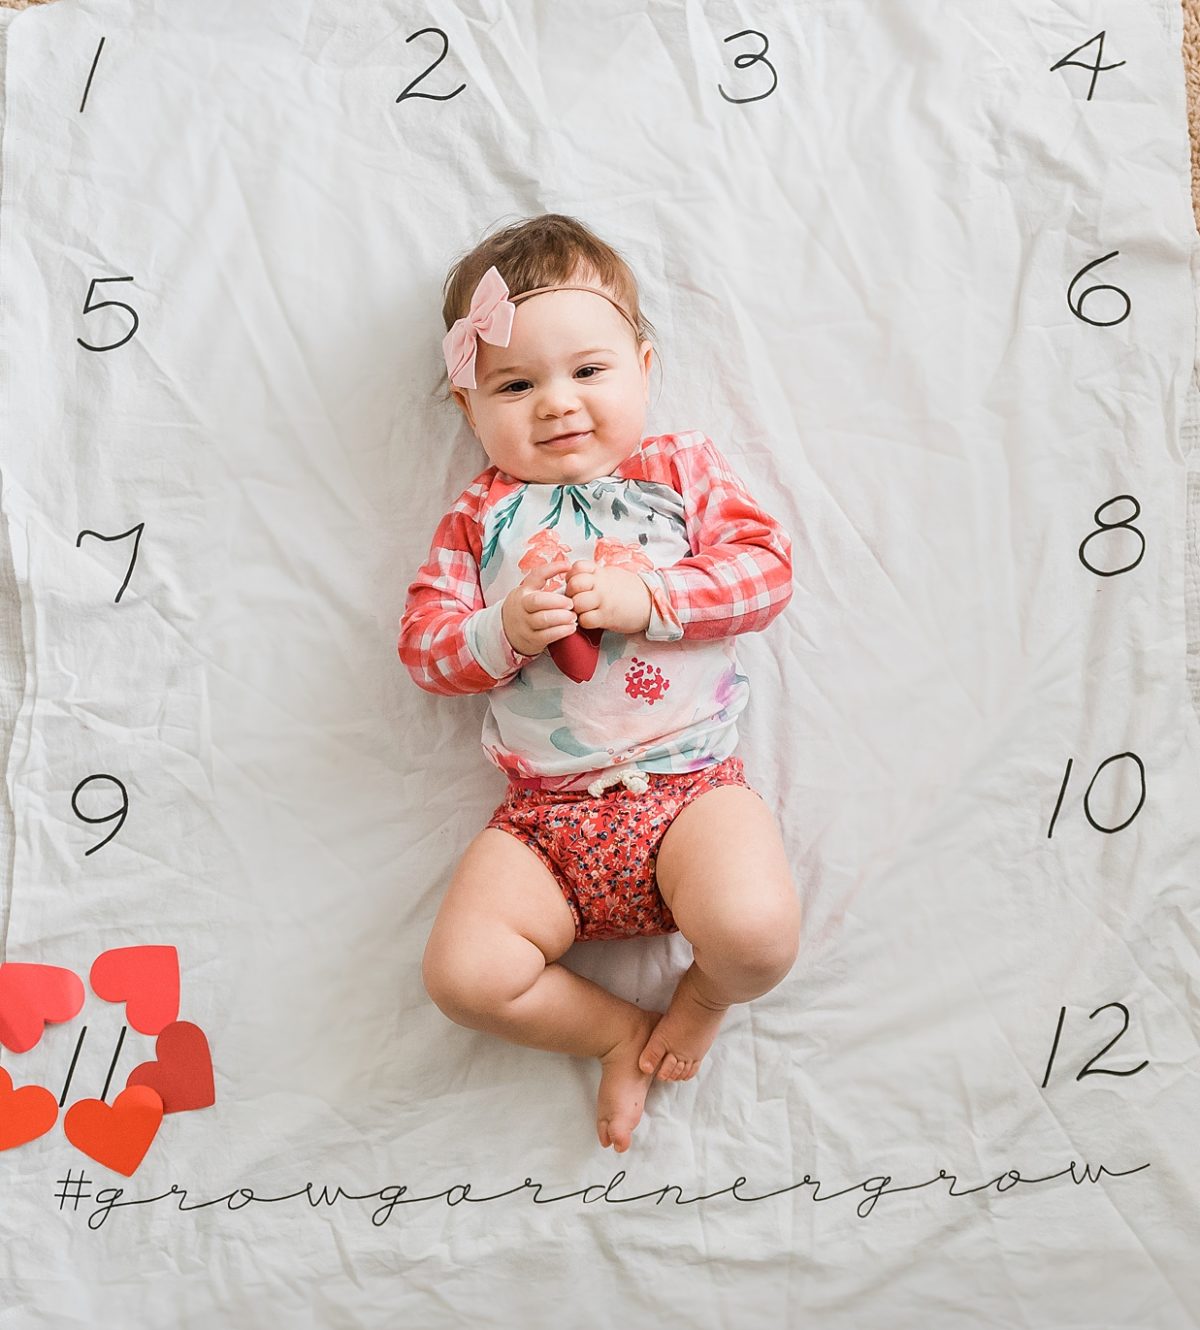 11 Months Young – Hatsy June